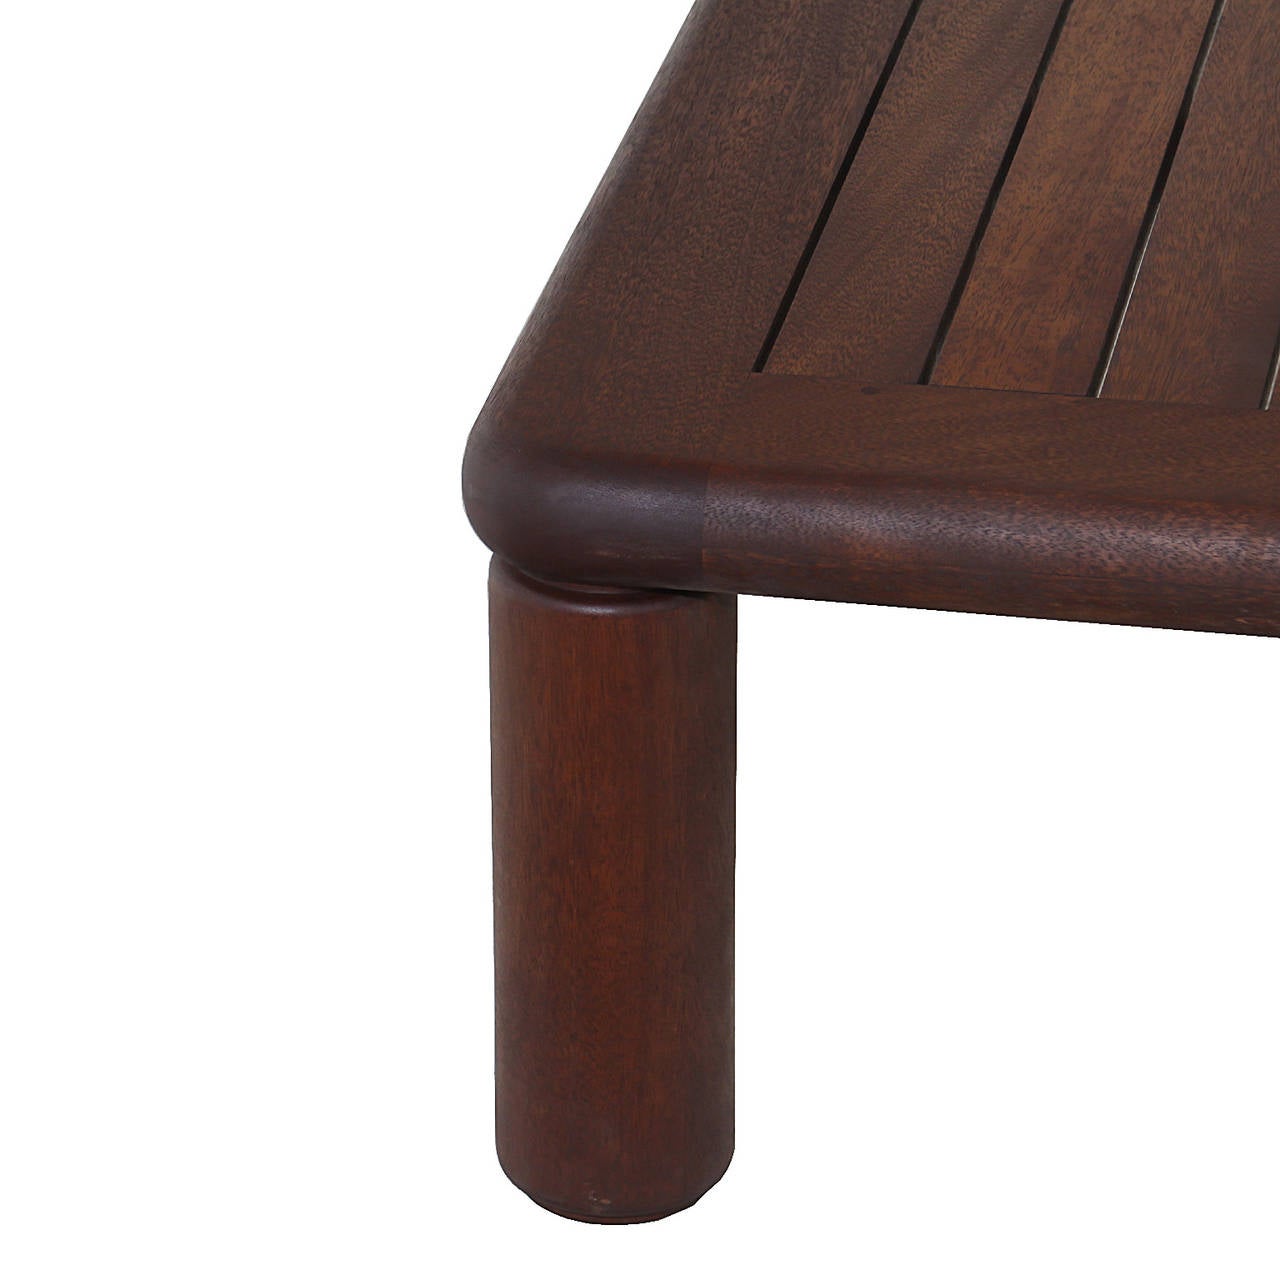 Mid-20th Century Slatted Solid Honduran Mahogany coffee table by Sherrill Broudy For Sale